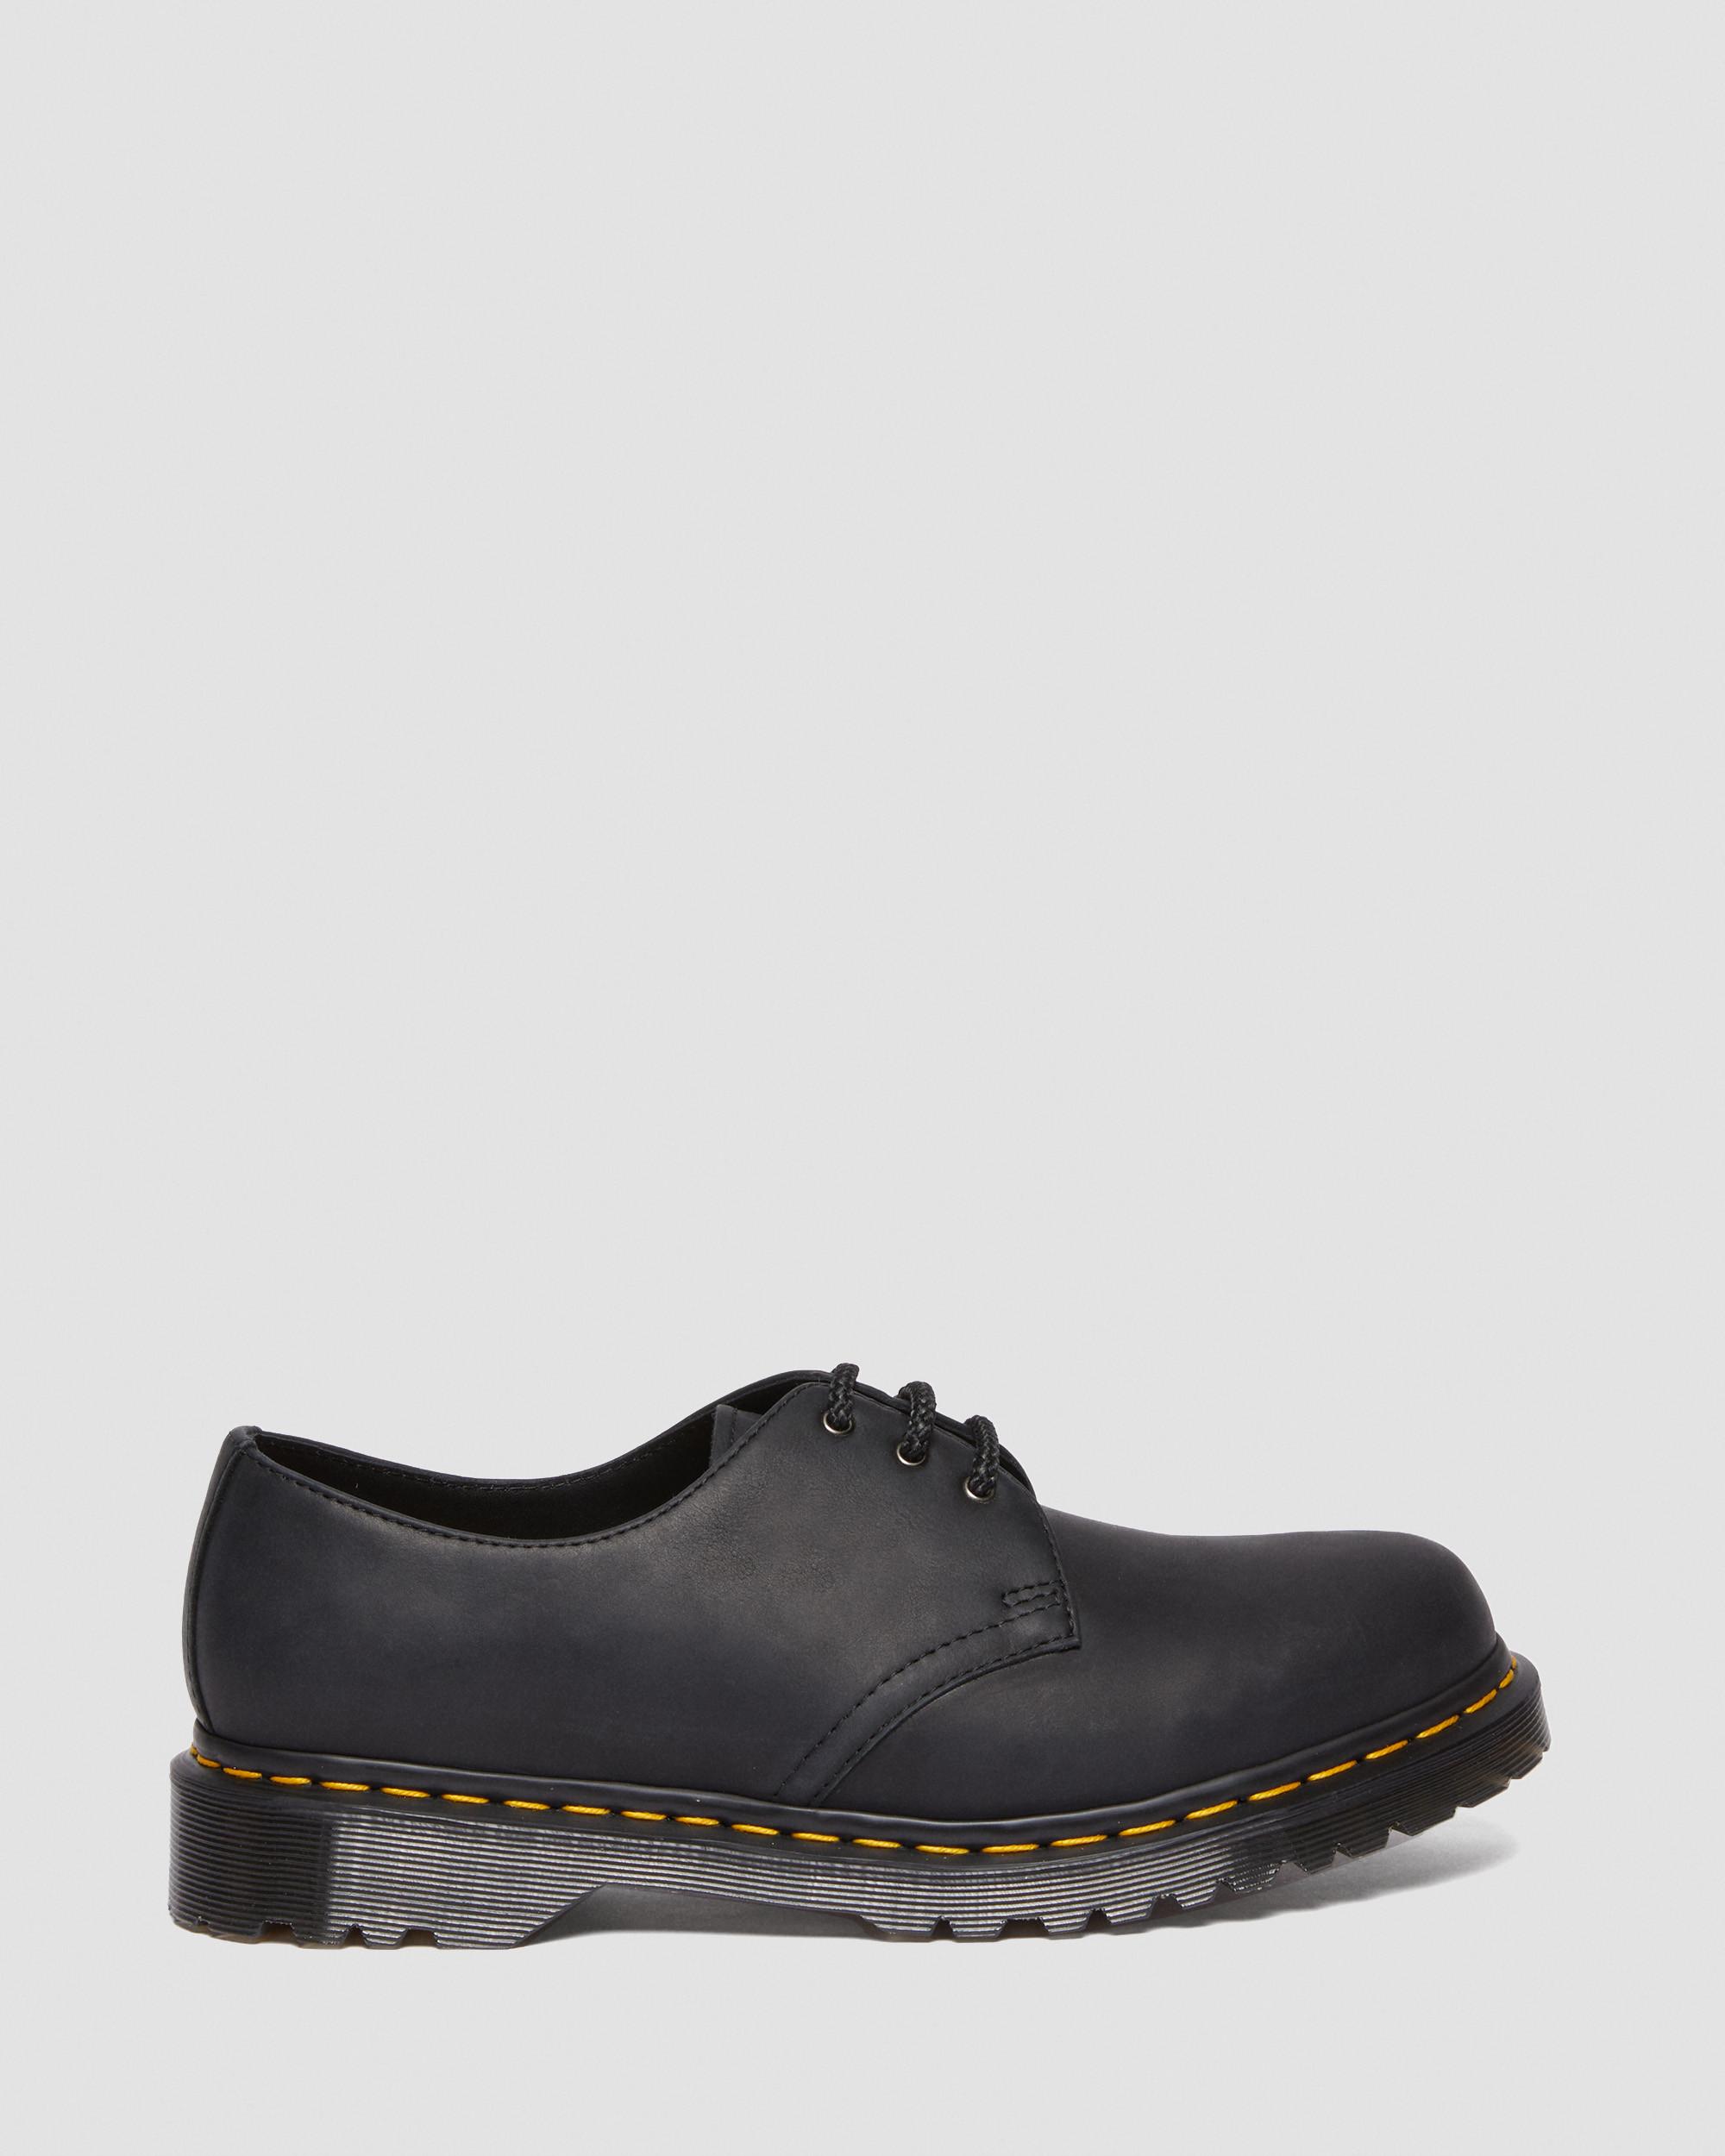 1461 Waxed Full Grain Leather Oxford Shoes in Black | Dr. Martens